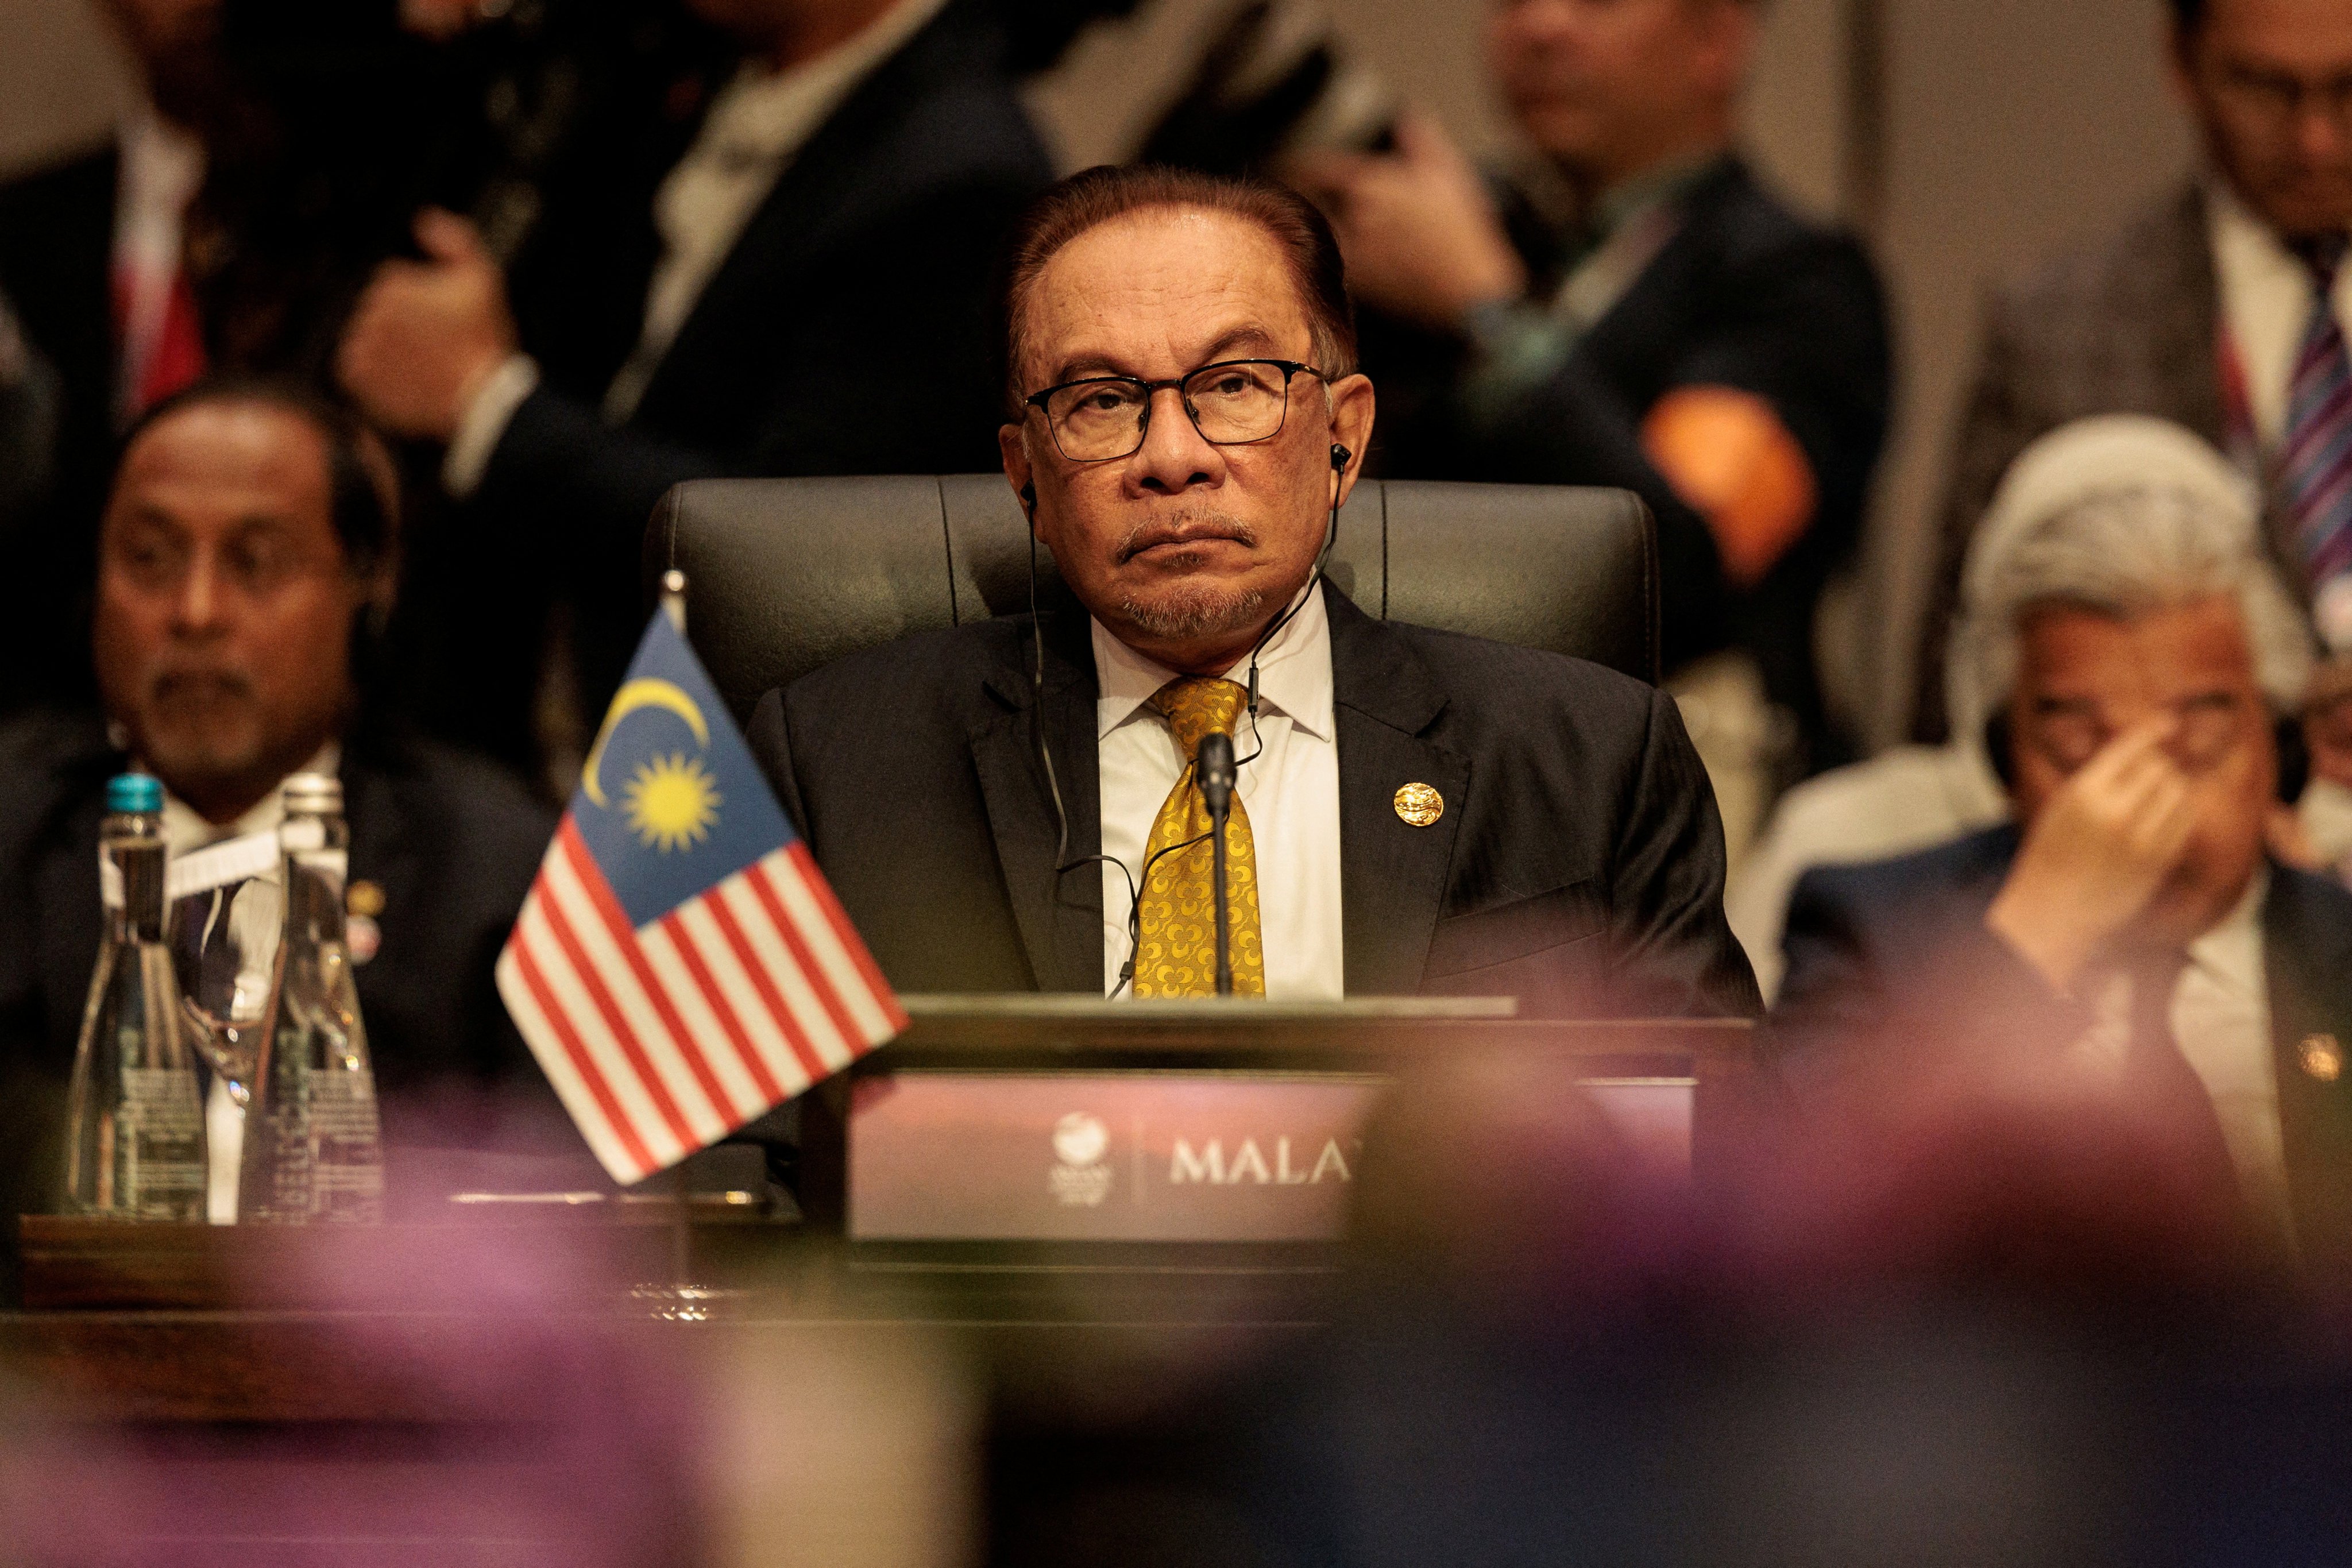 Malaysia’s Prime Minister Anwar Ibrahim has dismissed reports of attempts to oust him, saying his government “will not be affected”. Photo: Reuters